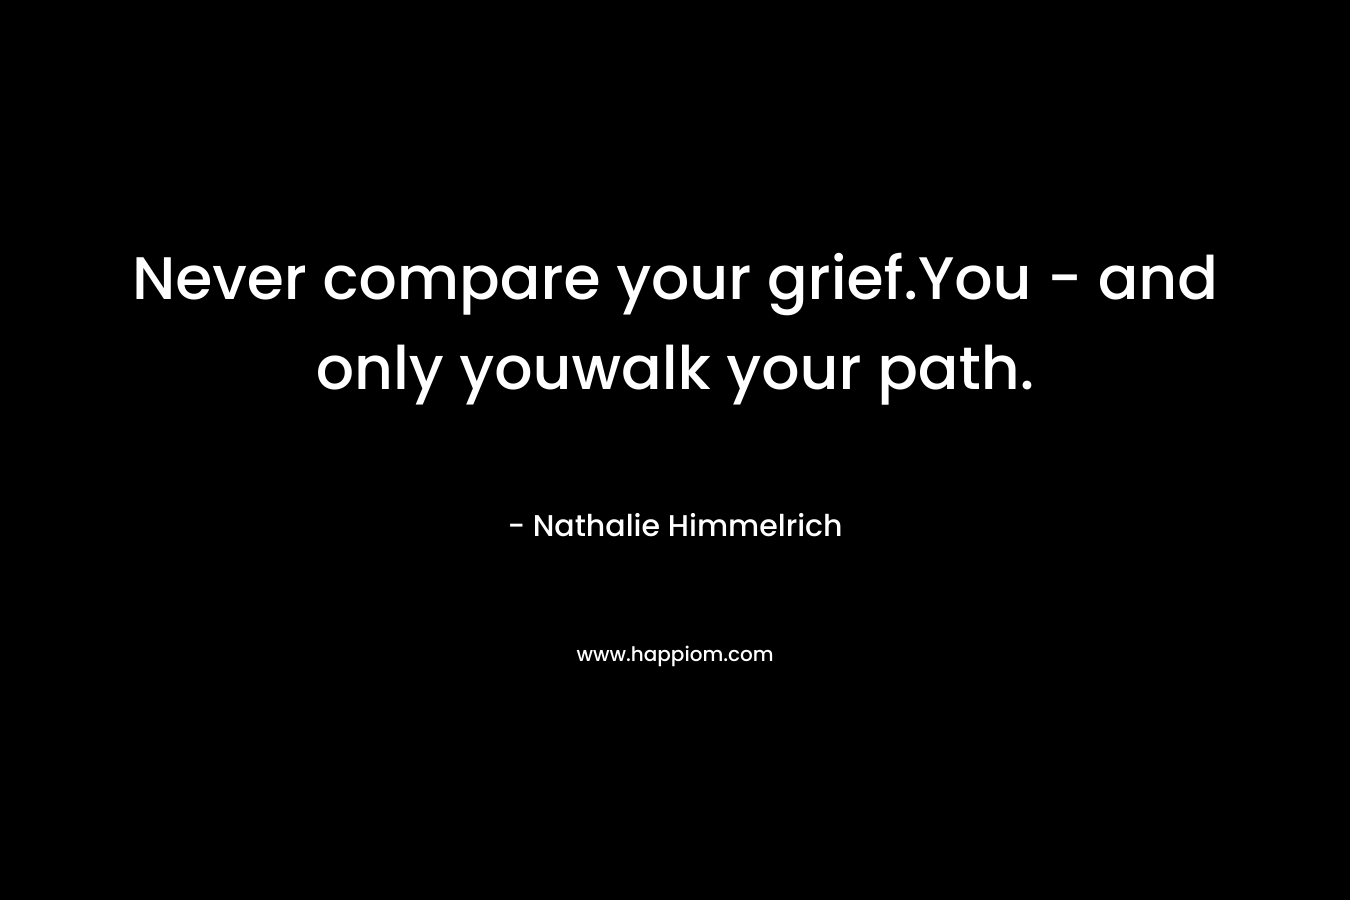 Never compare your grief.You – and only youwalk your path. – Nathalie Himmelrich